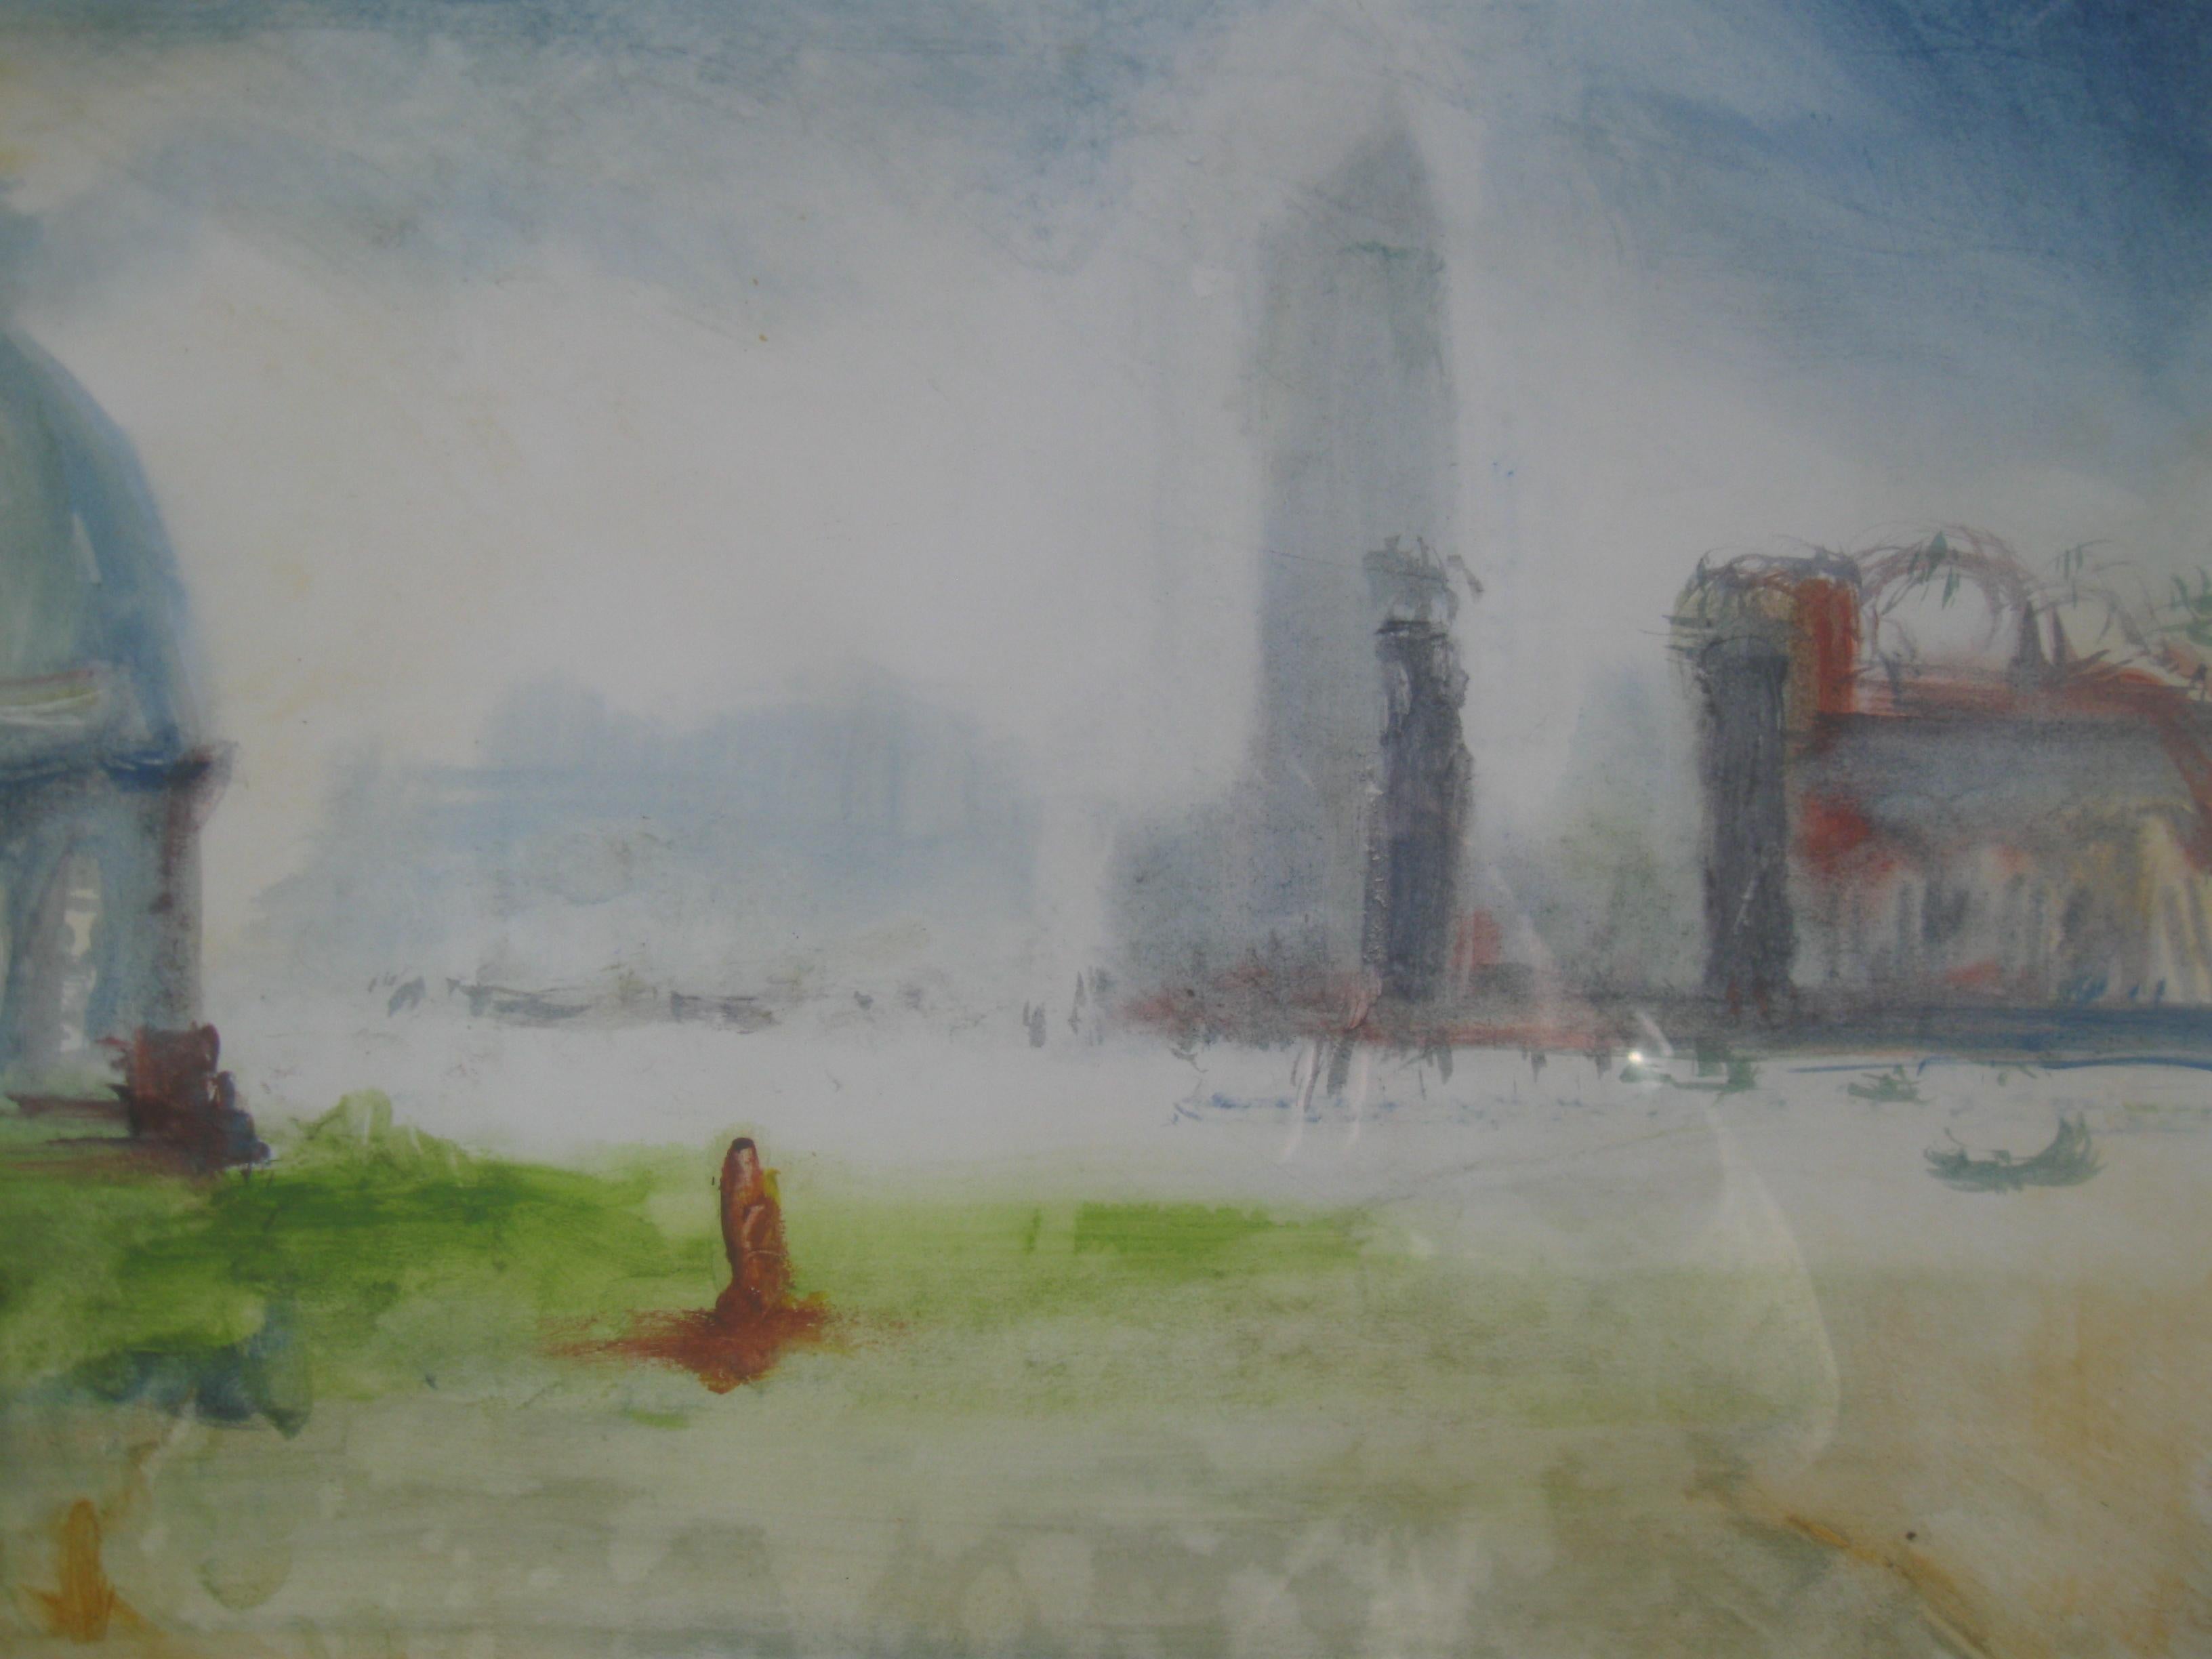 'Venice, Lagoon in morning Haze', mixed media on paper. Circa 2007. - Gray Landscape Painting by Andy Gradwell